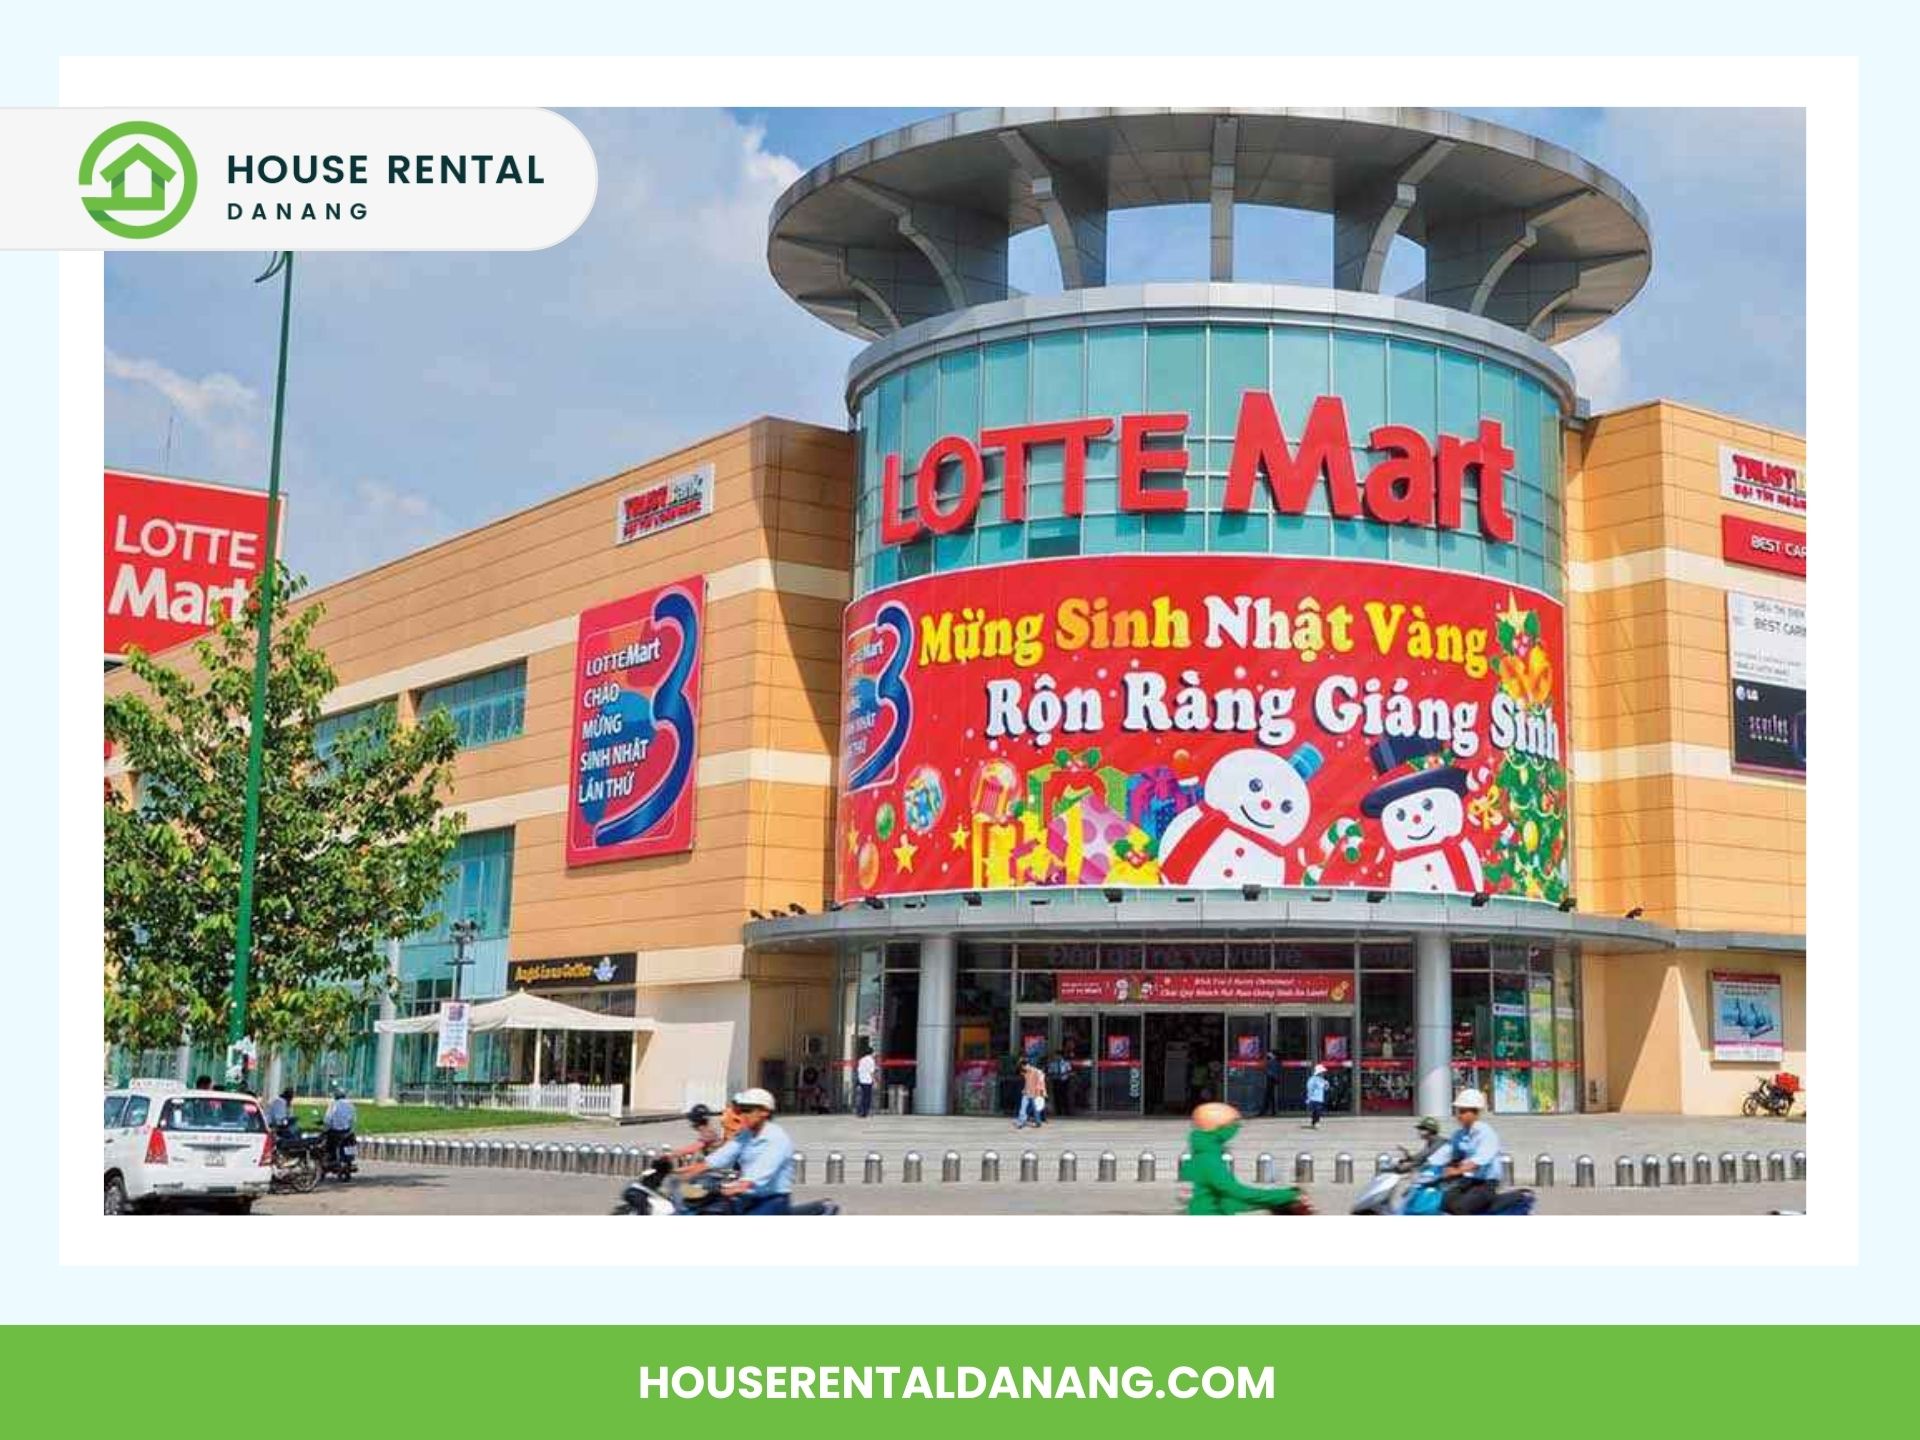 Exterior of Lotte Mart with a colorful holiday-themed banner, featuring festive decorations and Santa Claus. People on motorcycles are visible in the foreground, highlighting it as one of the Best Places for Shopping in Da Nang.